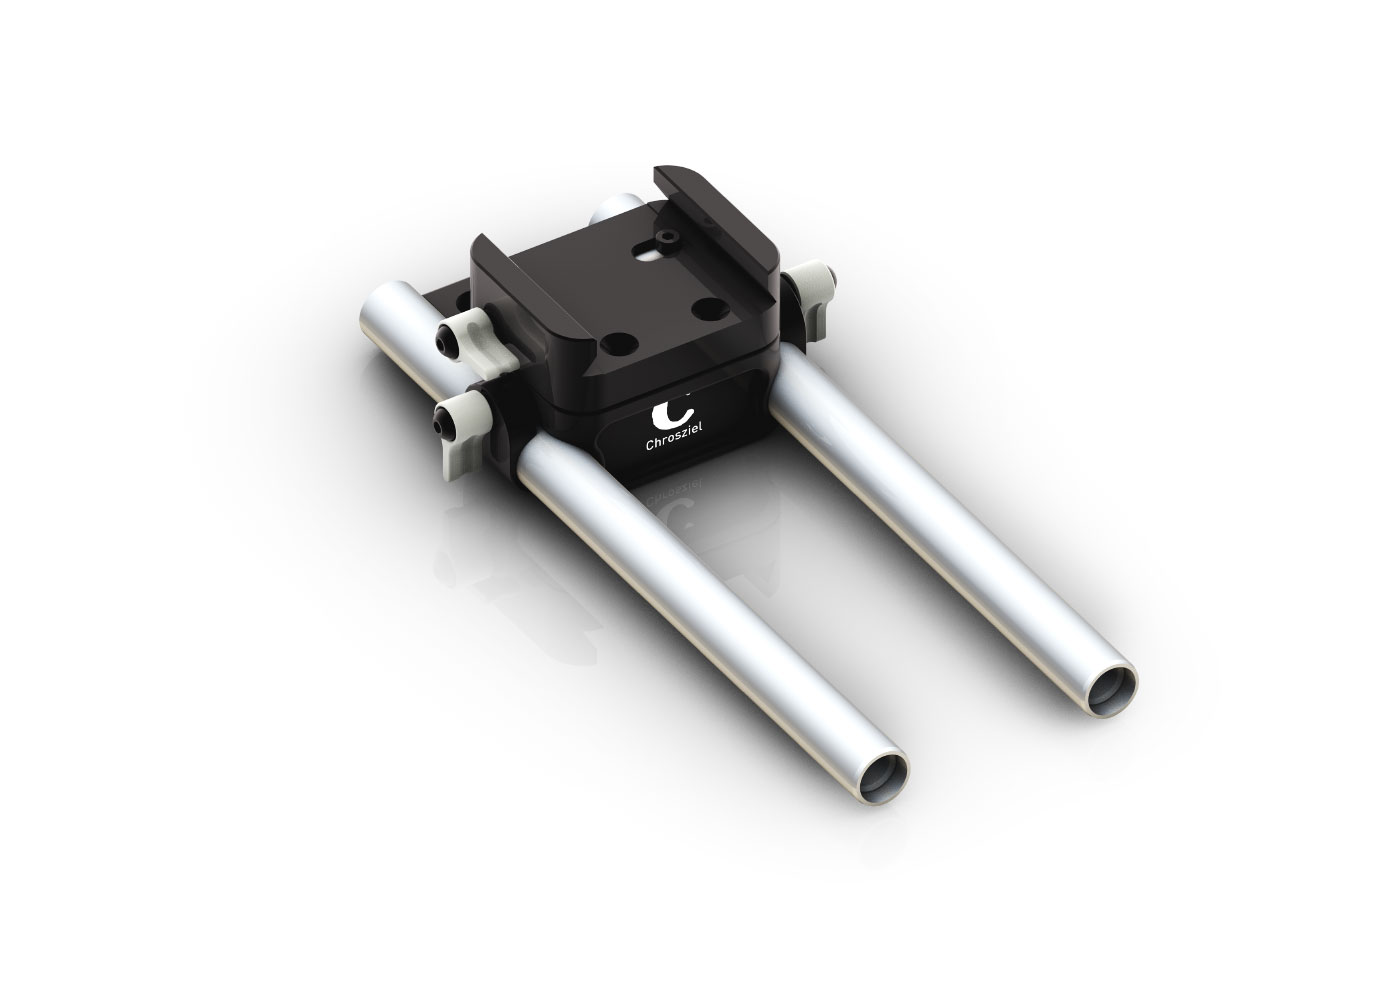 Light Weight Support for Chrosziel Camera Cage Systems